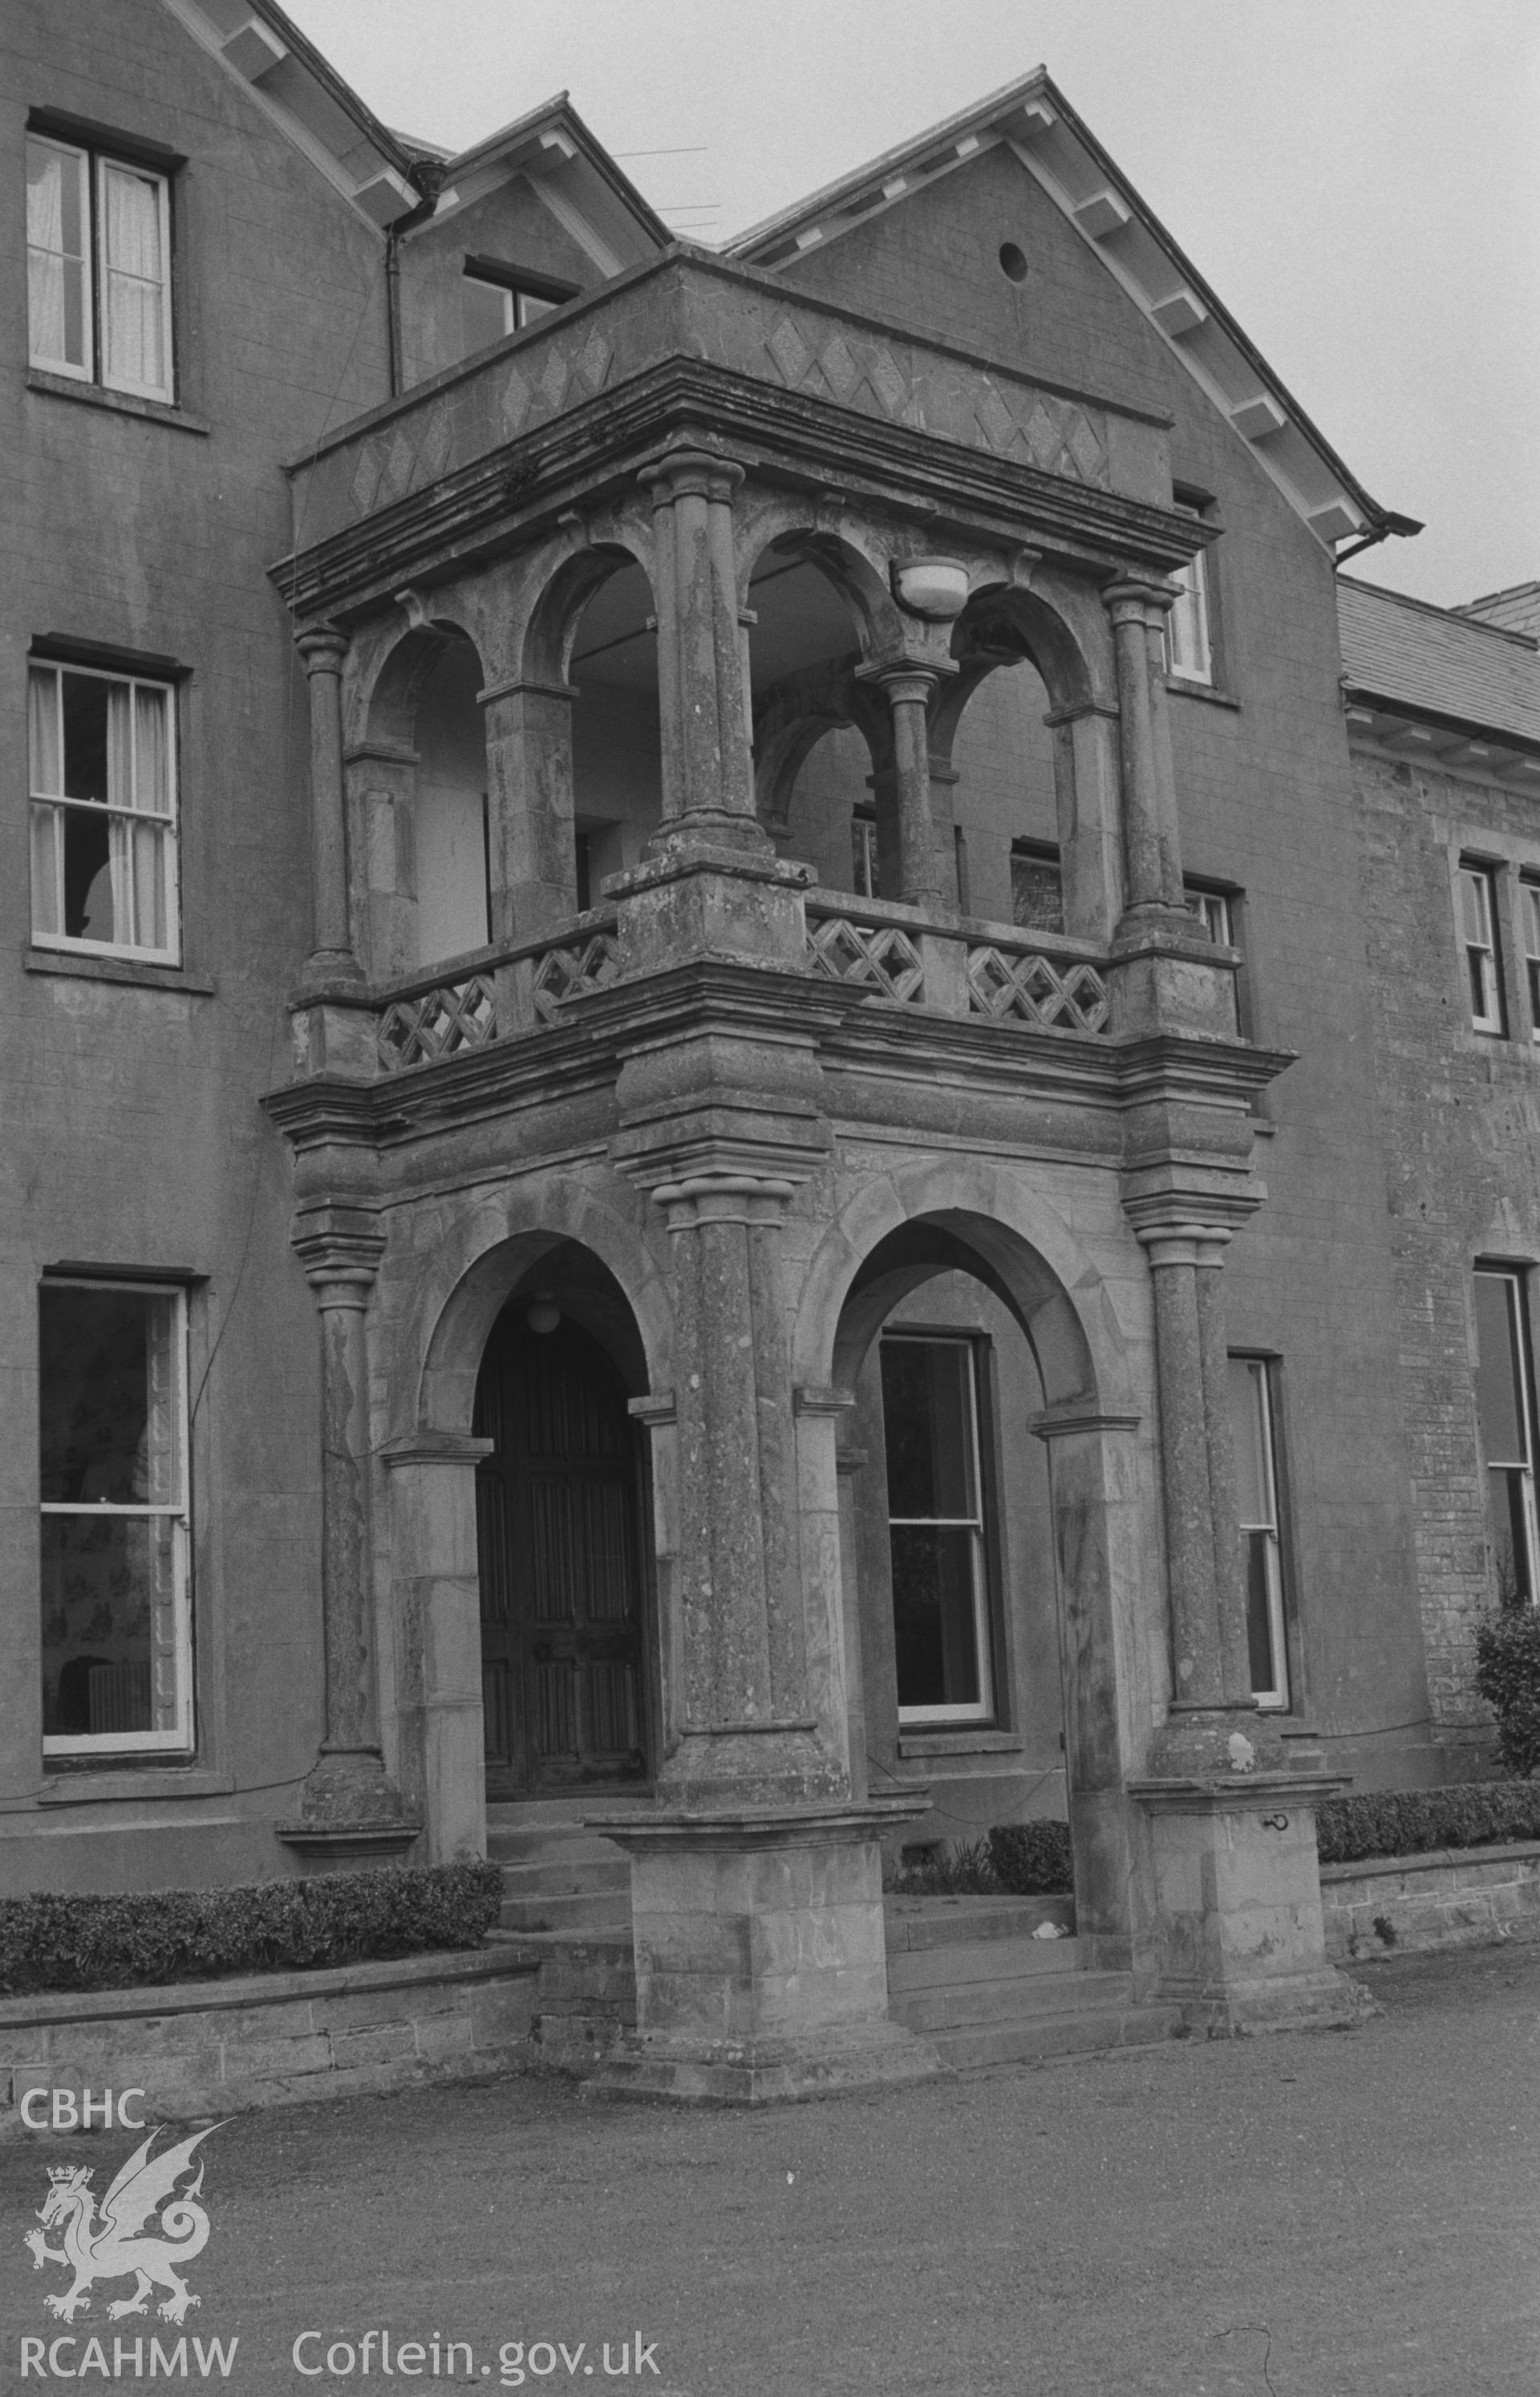 Digital copy of a black and white negative showing the two storied porch over the front door of Highmead House, Llanwenog. Photographed by Arthur O. Chater on 11th April 1967 looking north from Grid Reference SN 502 431.